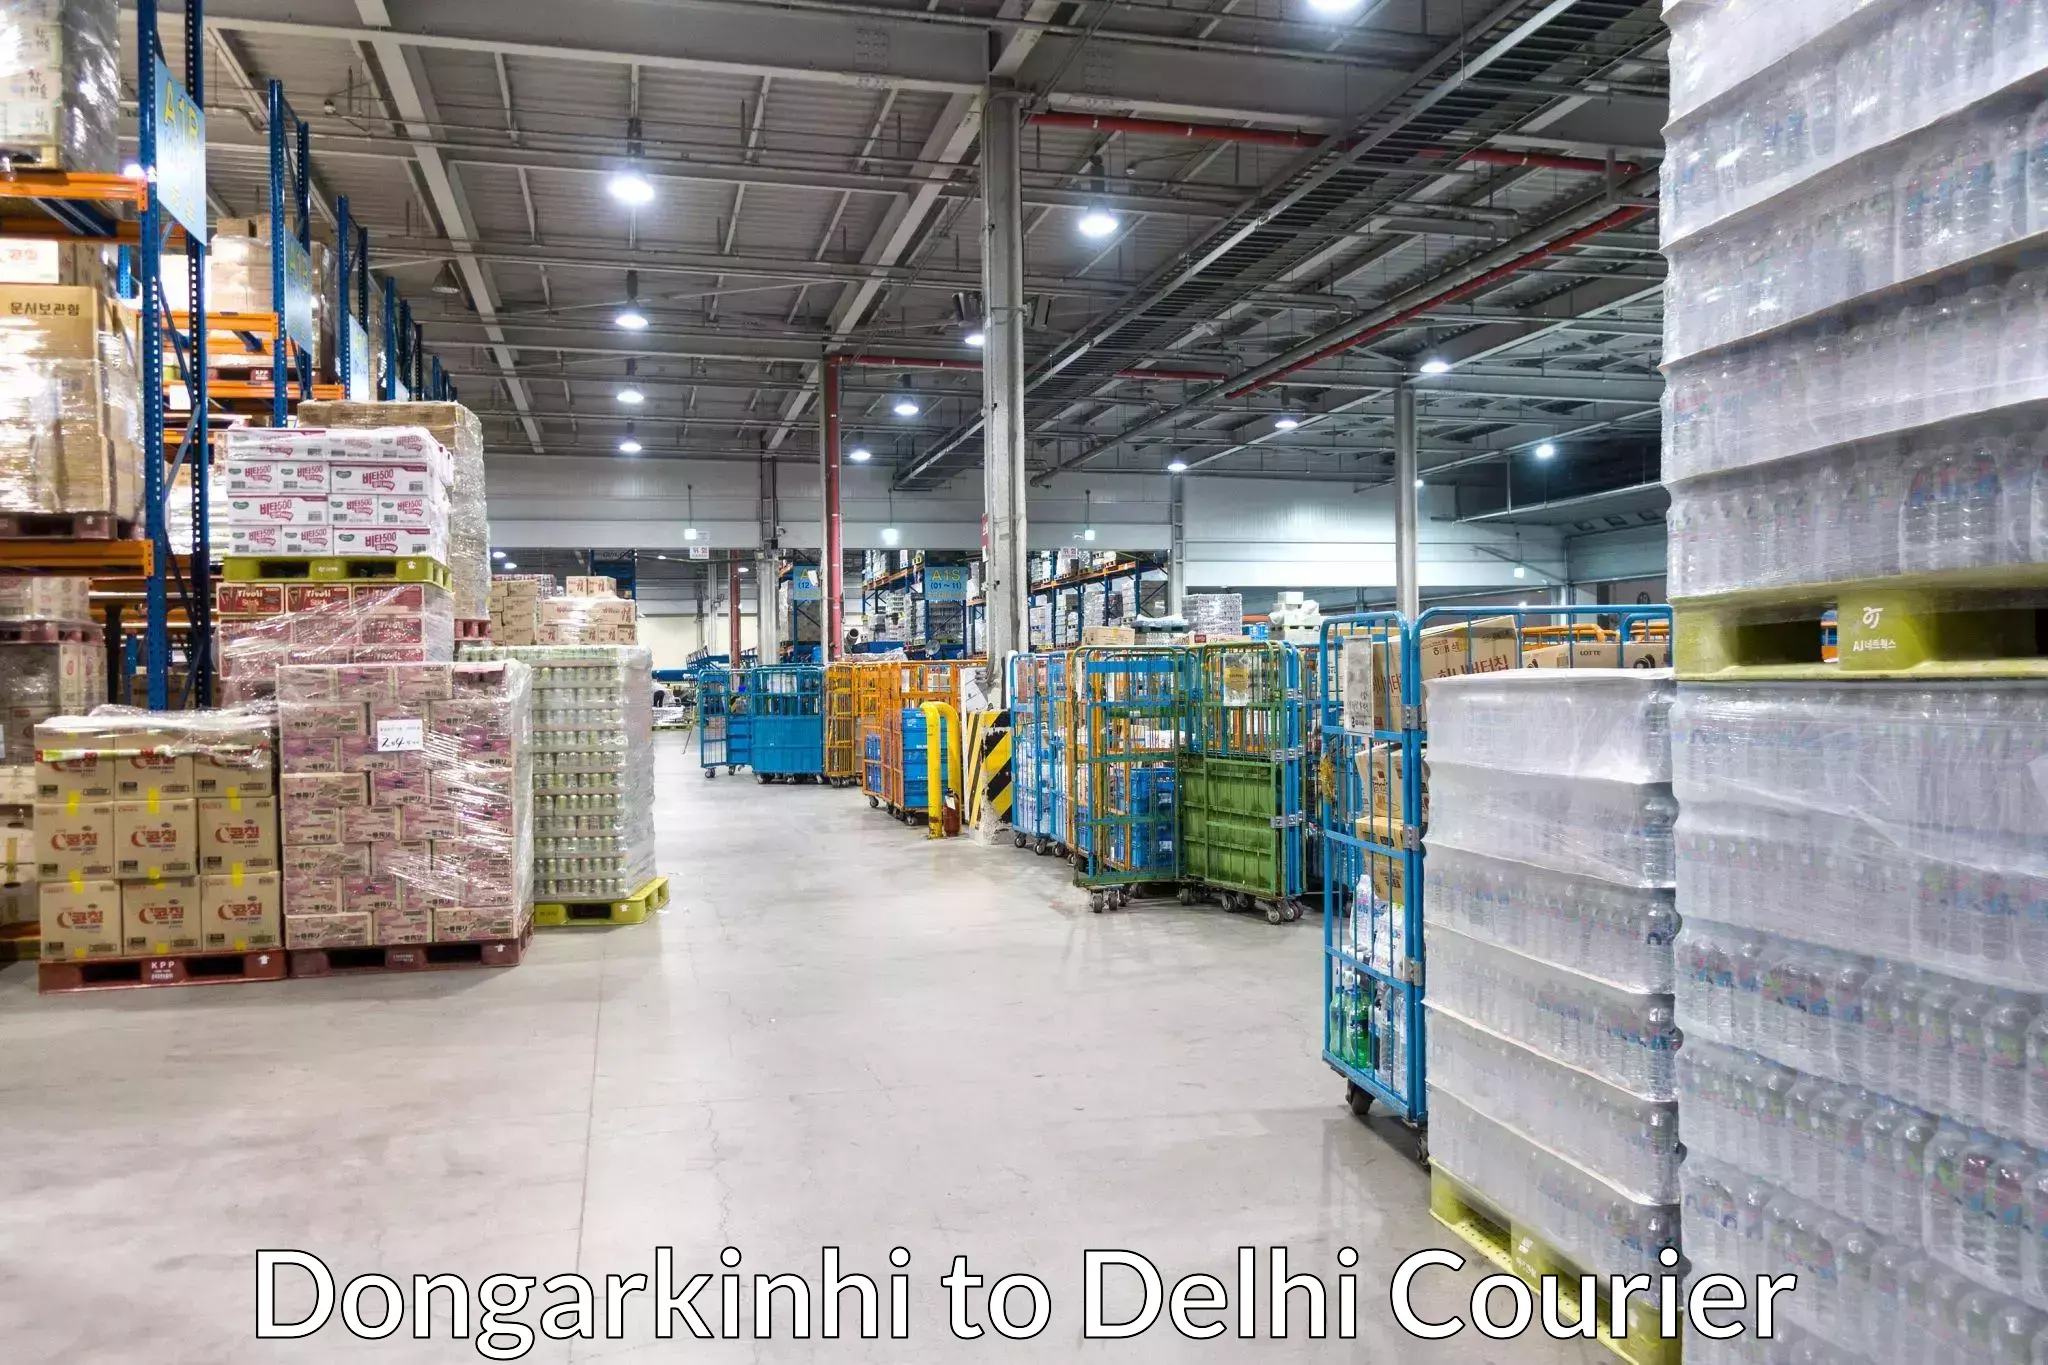 Courier dispatch services in Dongarkinhi to Ashok Vihar